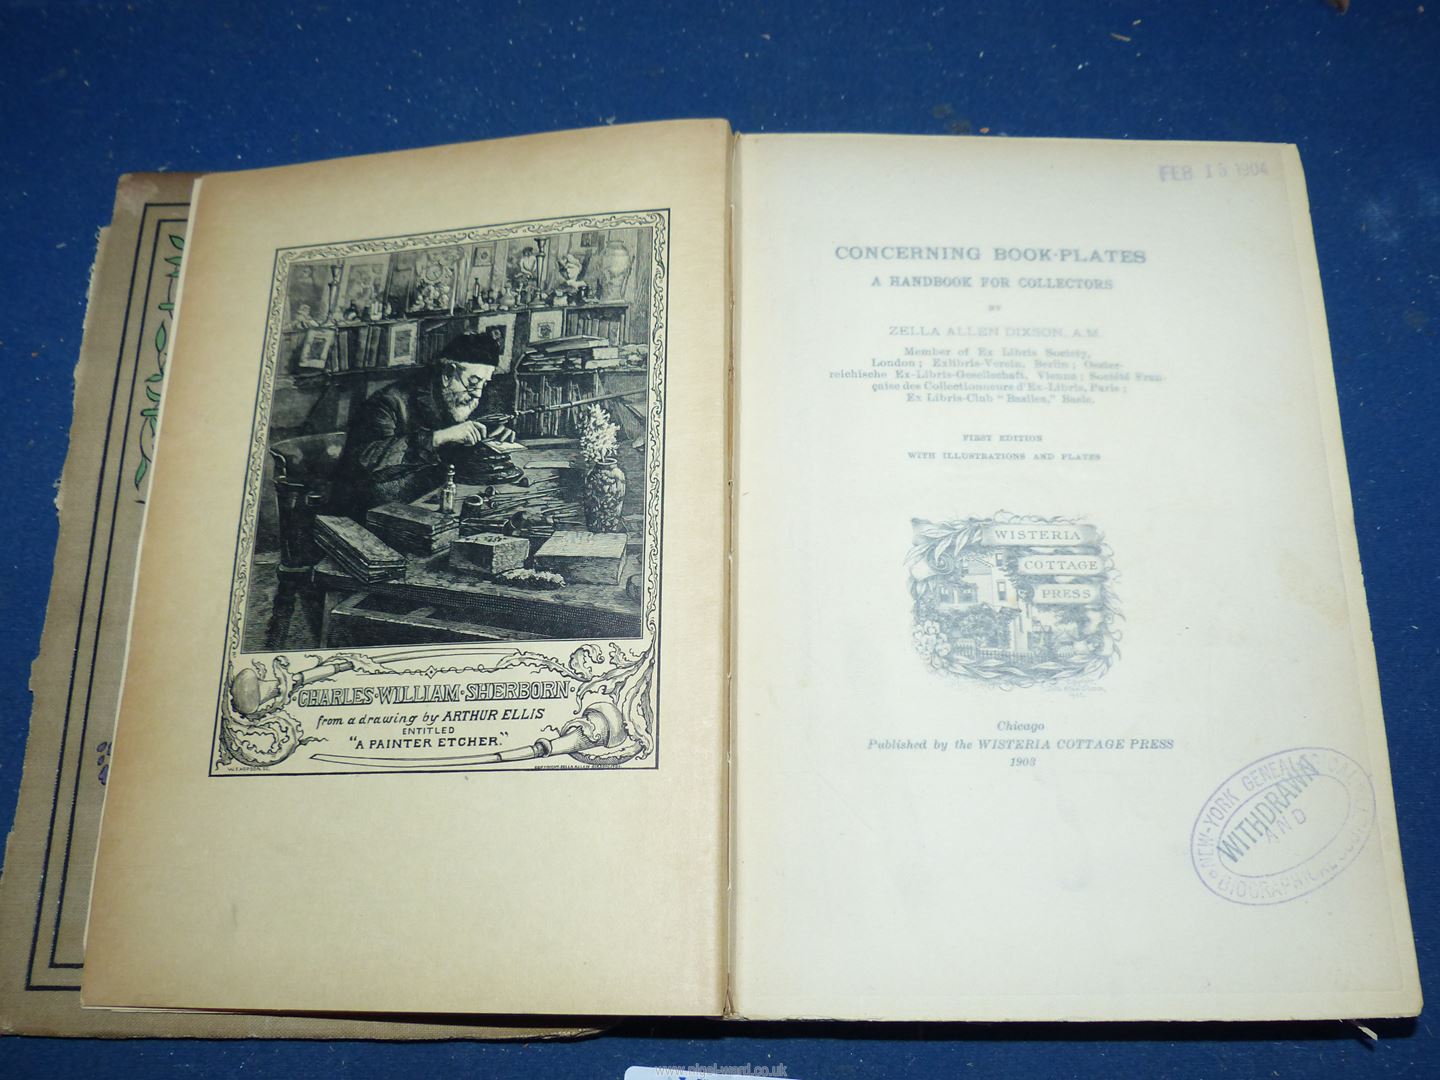 'Concerning Book Plates' for collectors by Zella Allen Dixson, plus an Ex Libris First Edition, a/f. - Image 2 of 6